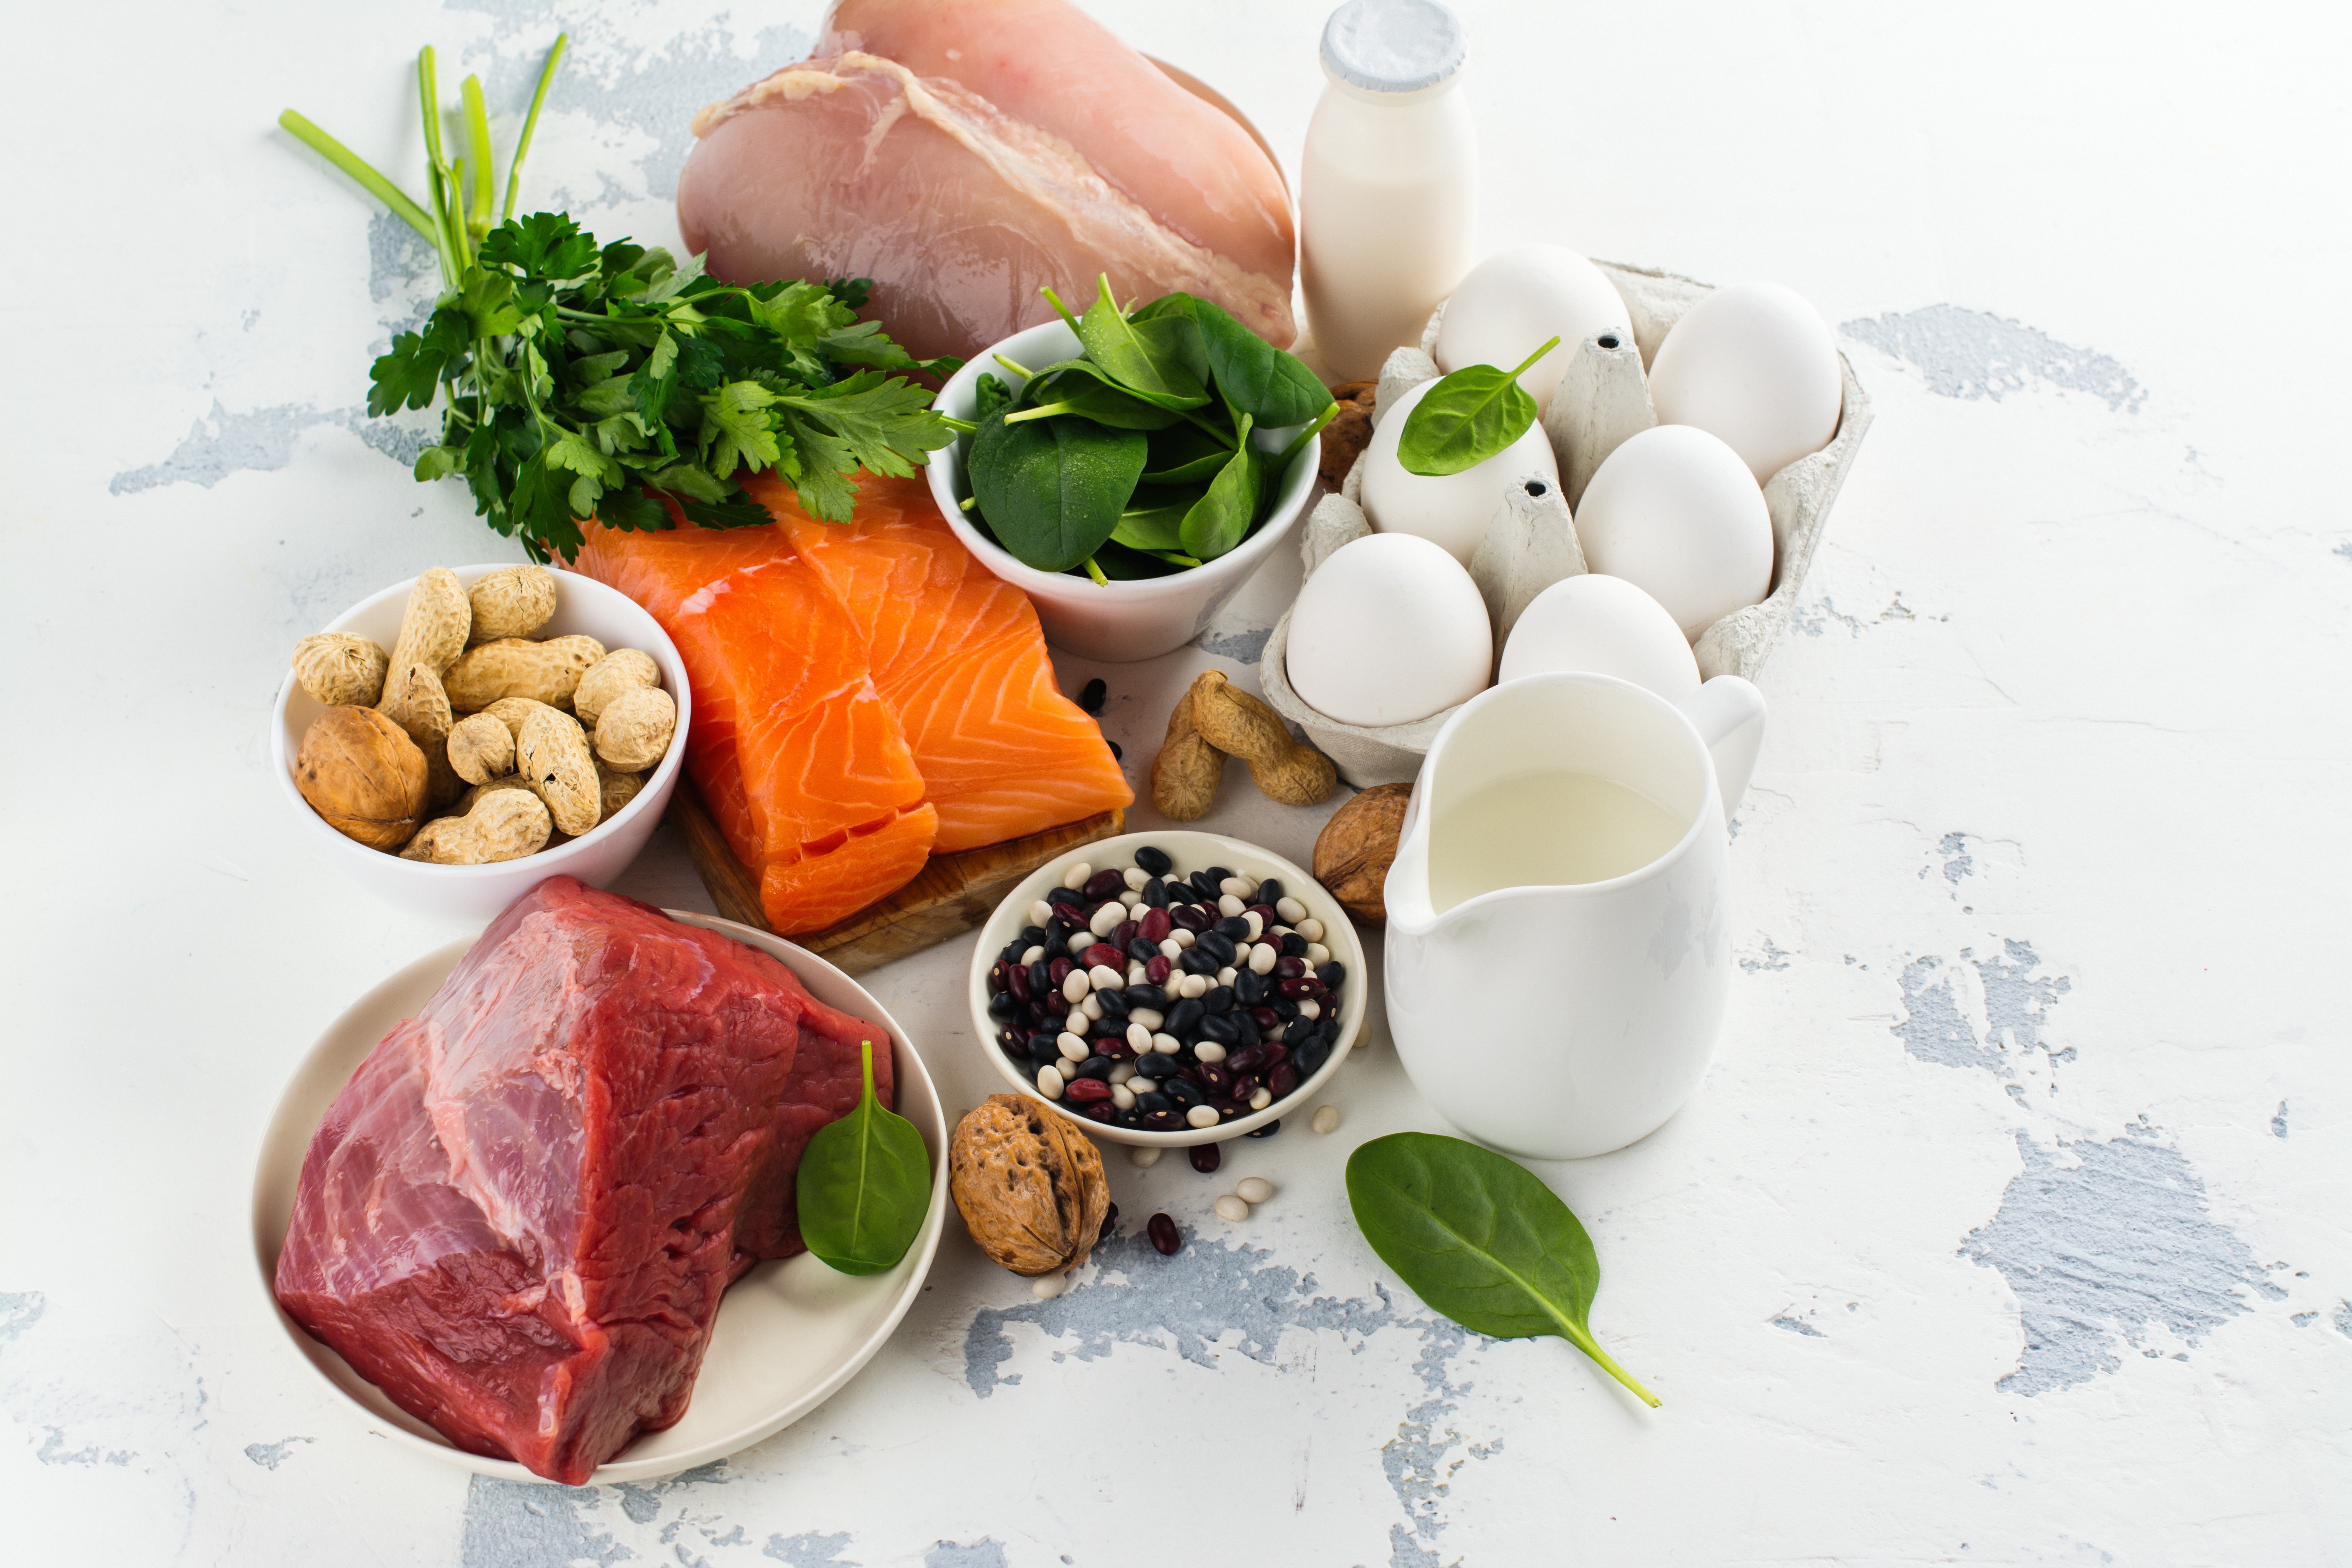 The Paleo Diet: Fad or Friend?